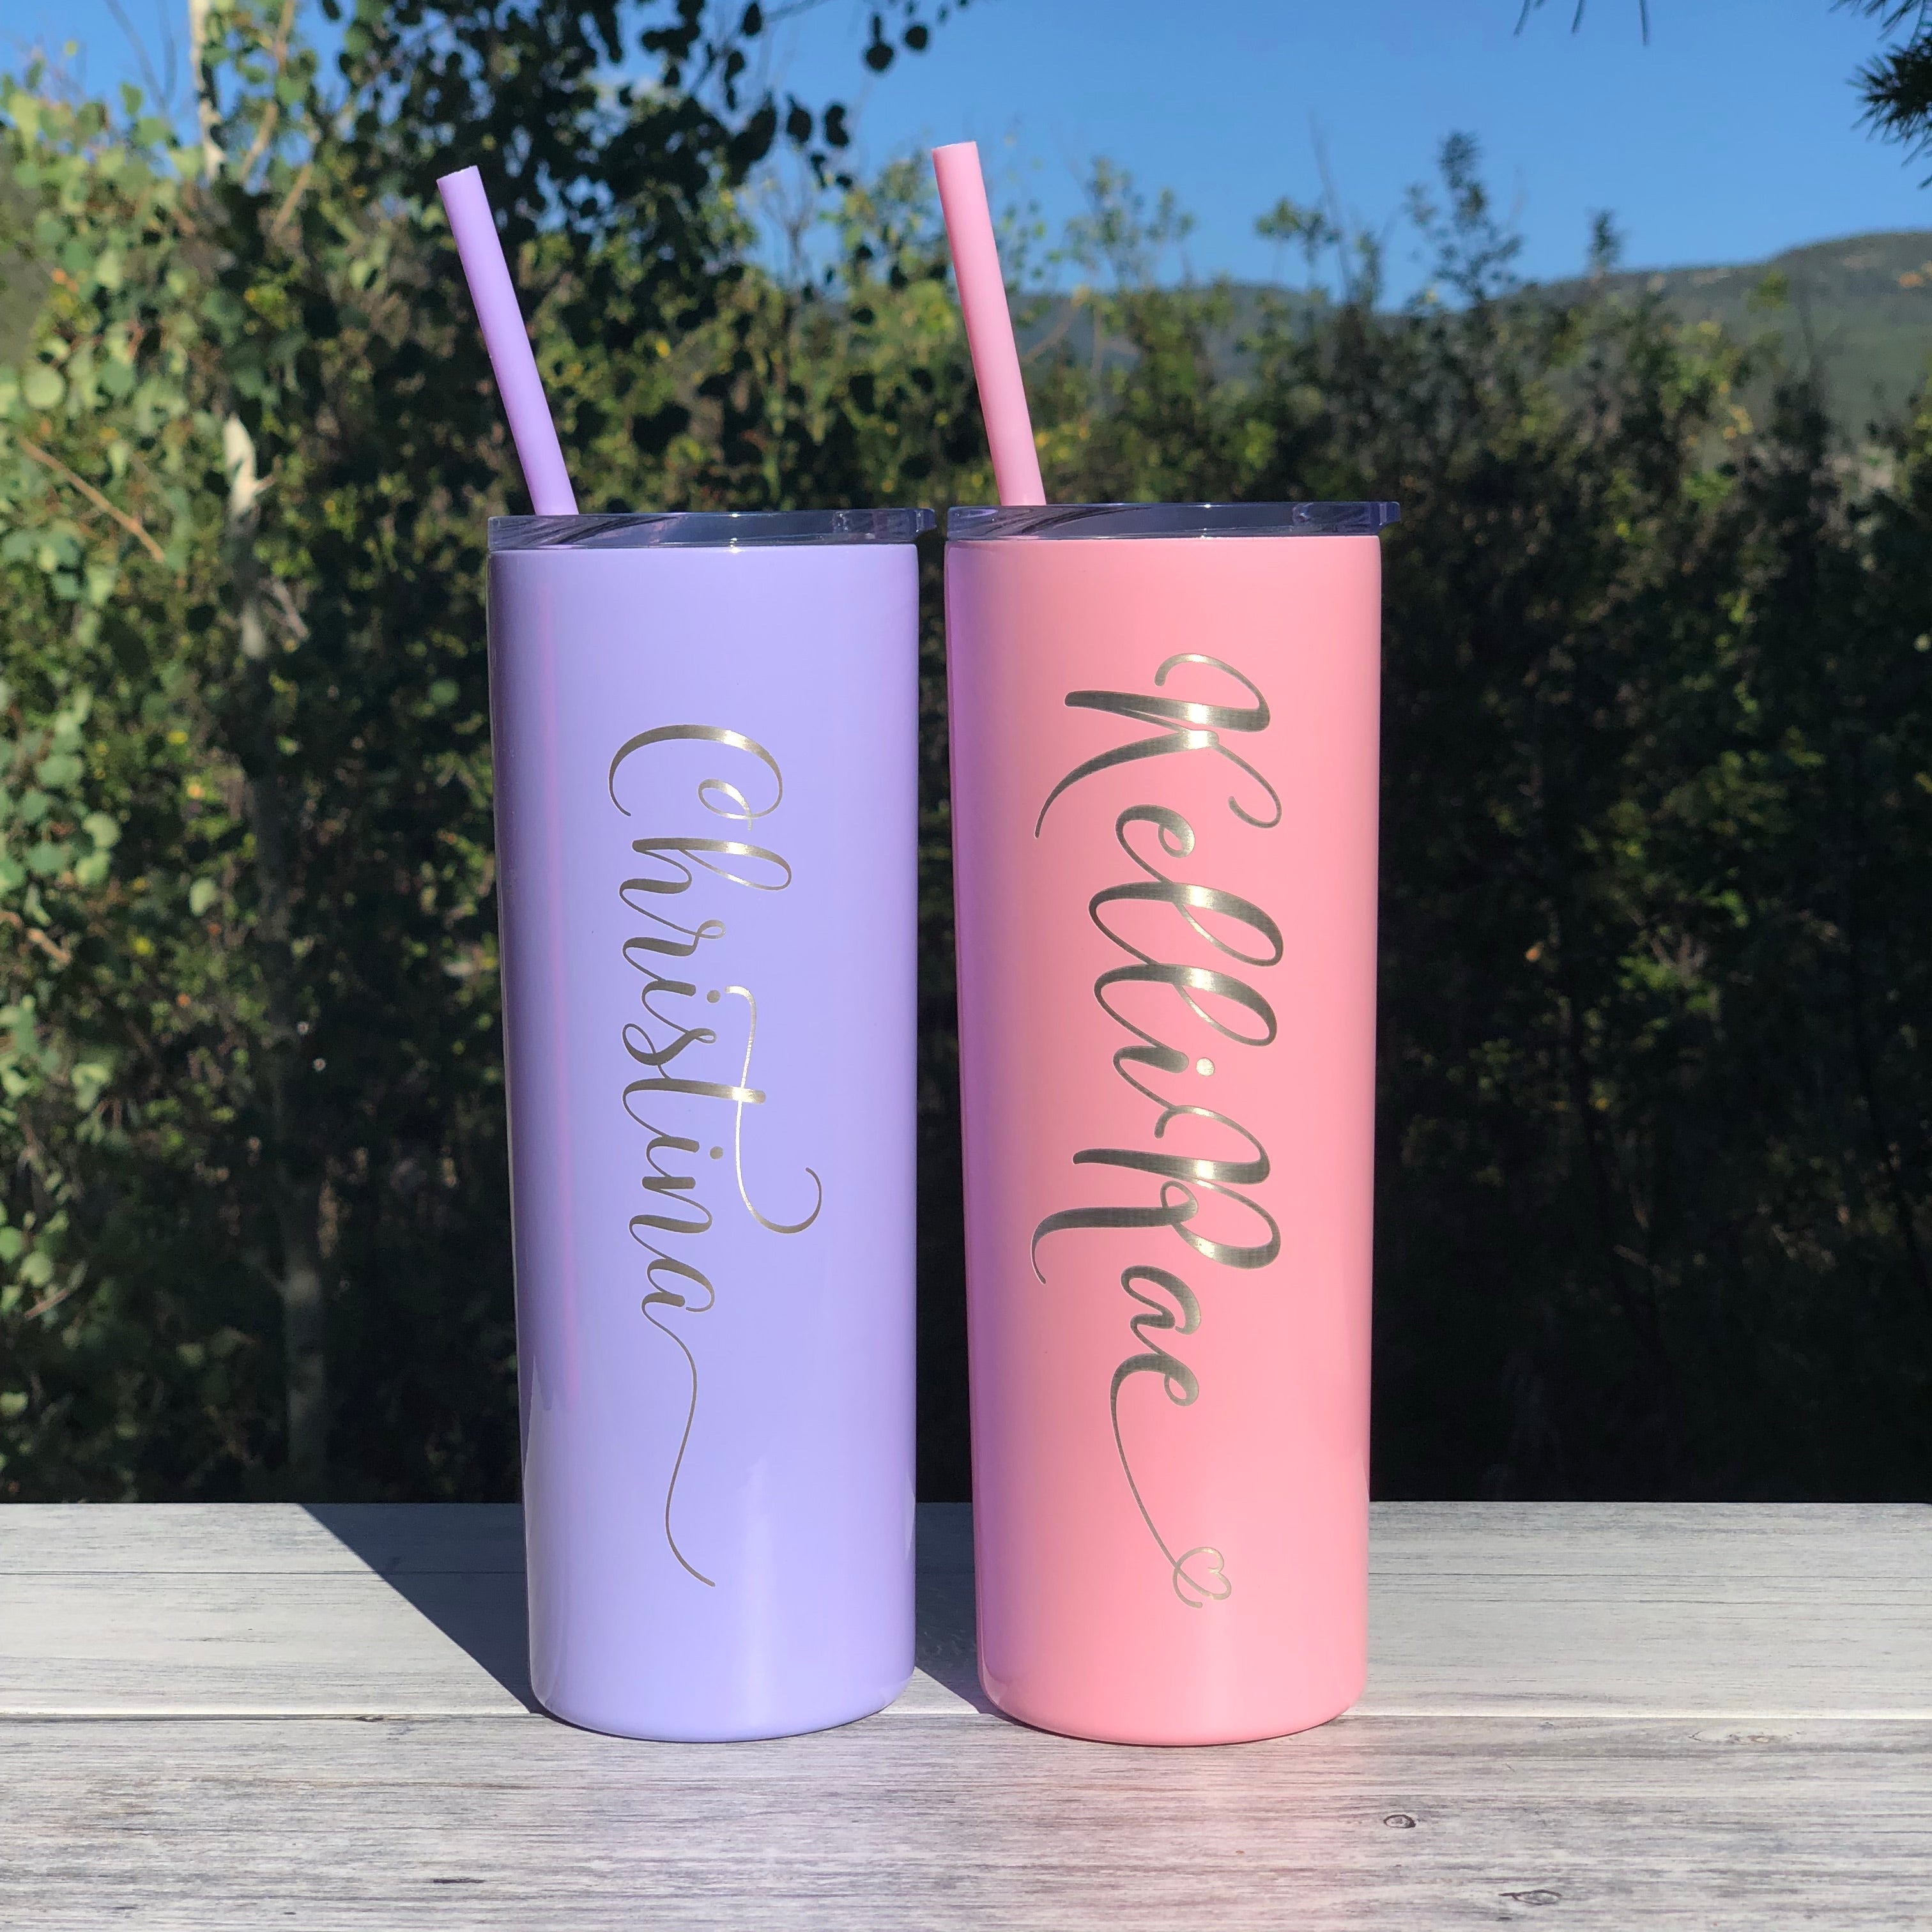  Westpearl 20 OZ Personalized Skinny Tumblers,Gift for  Christmas,Custom Stainless Steel Tumblers with Lids and Straws,Free Laser  Engraving 16 Icons 13 Colors 20 Fonts-Rose Gold : Home & Kitchen